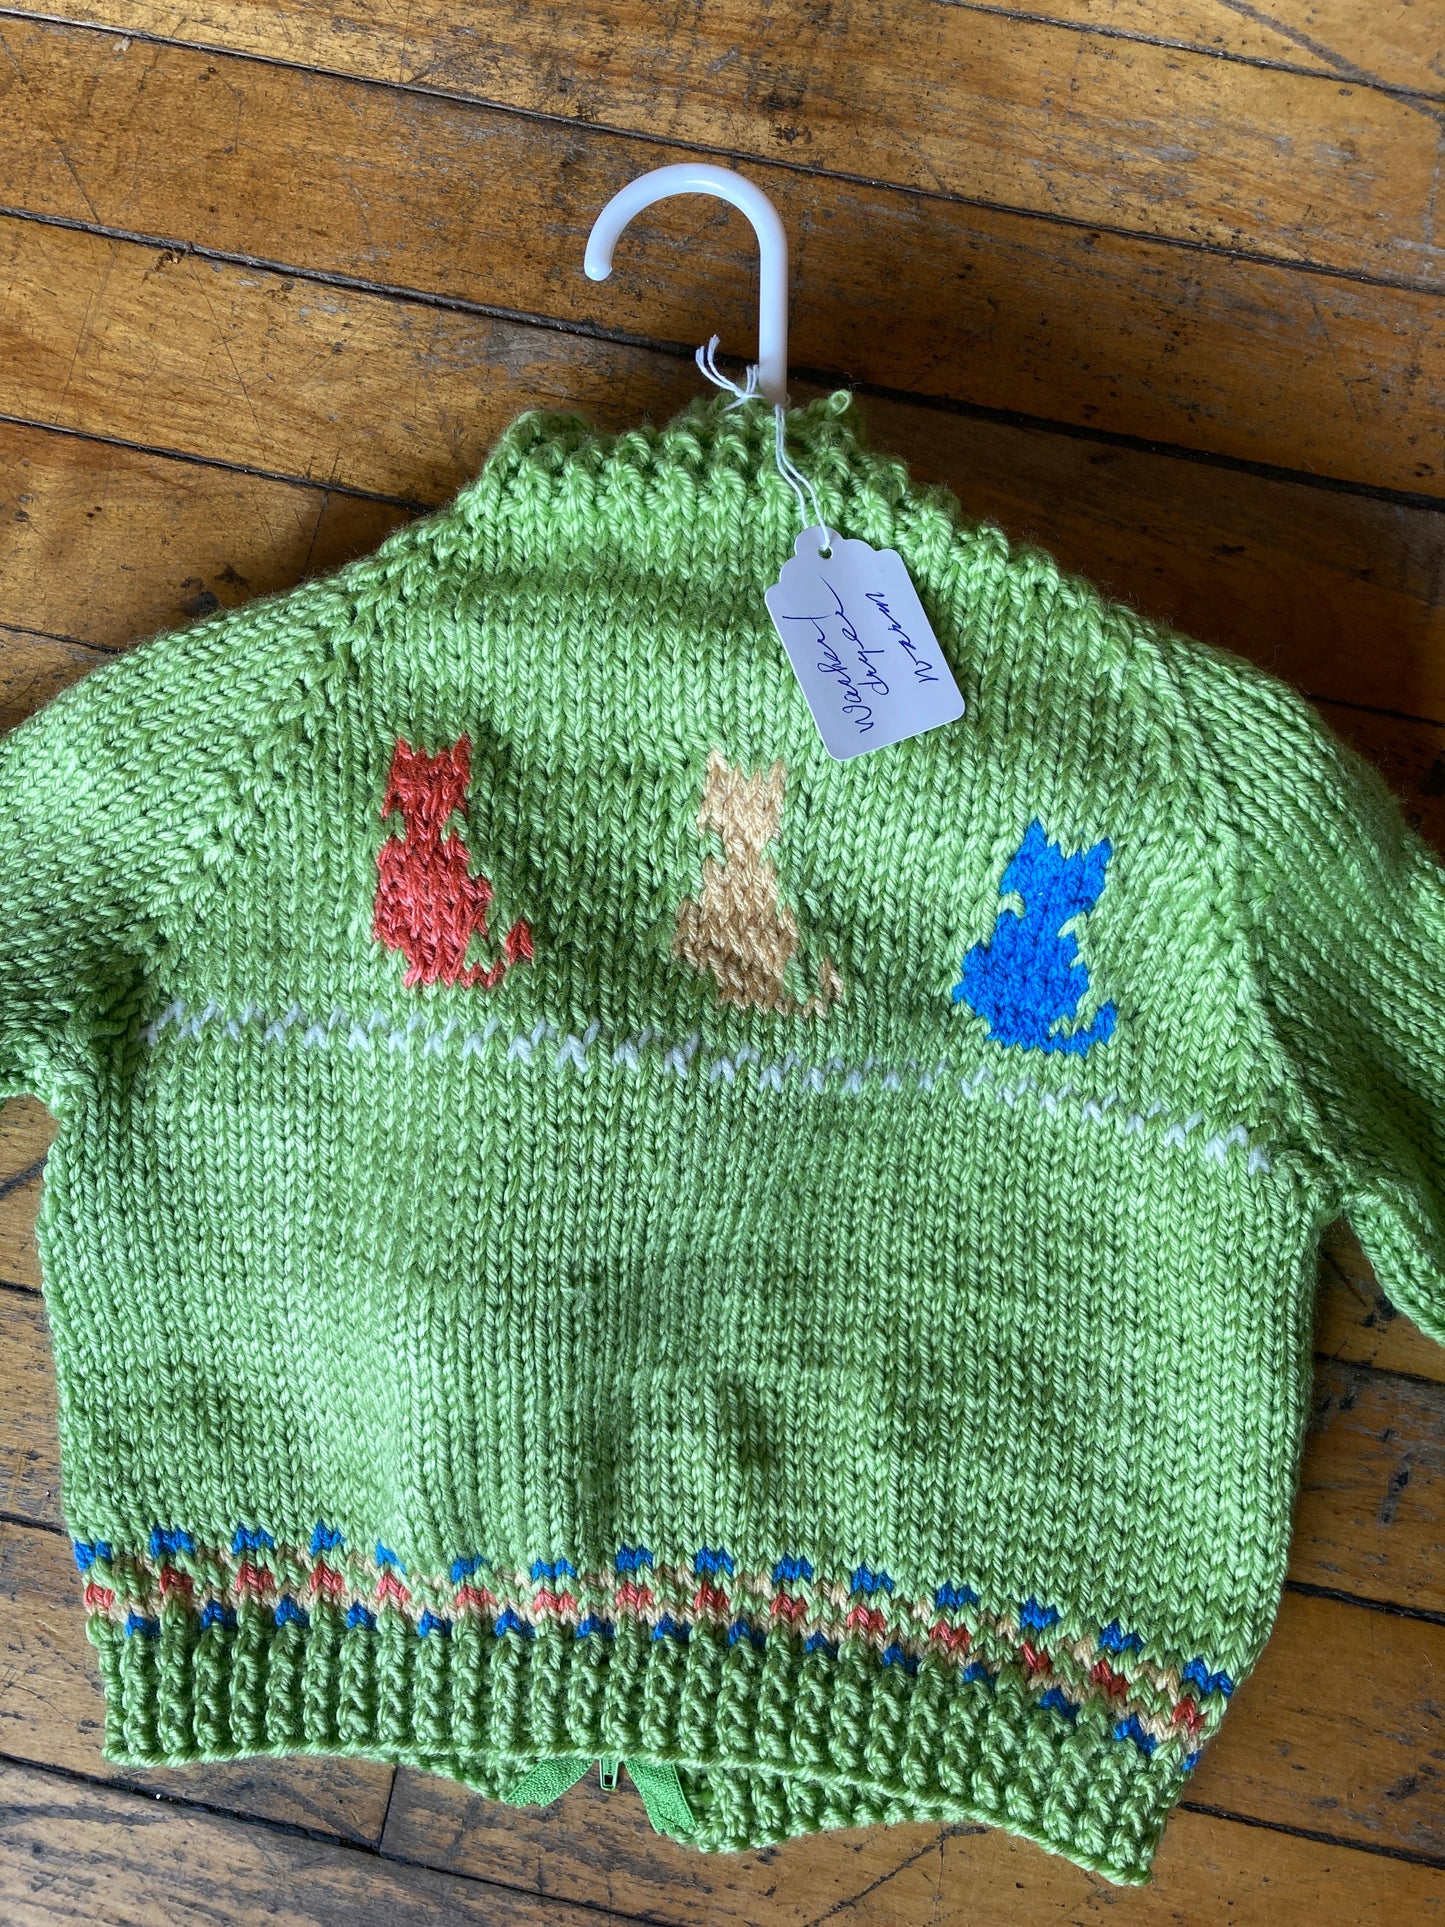 Hand knit baby sweaters